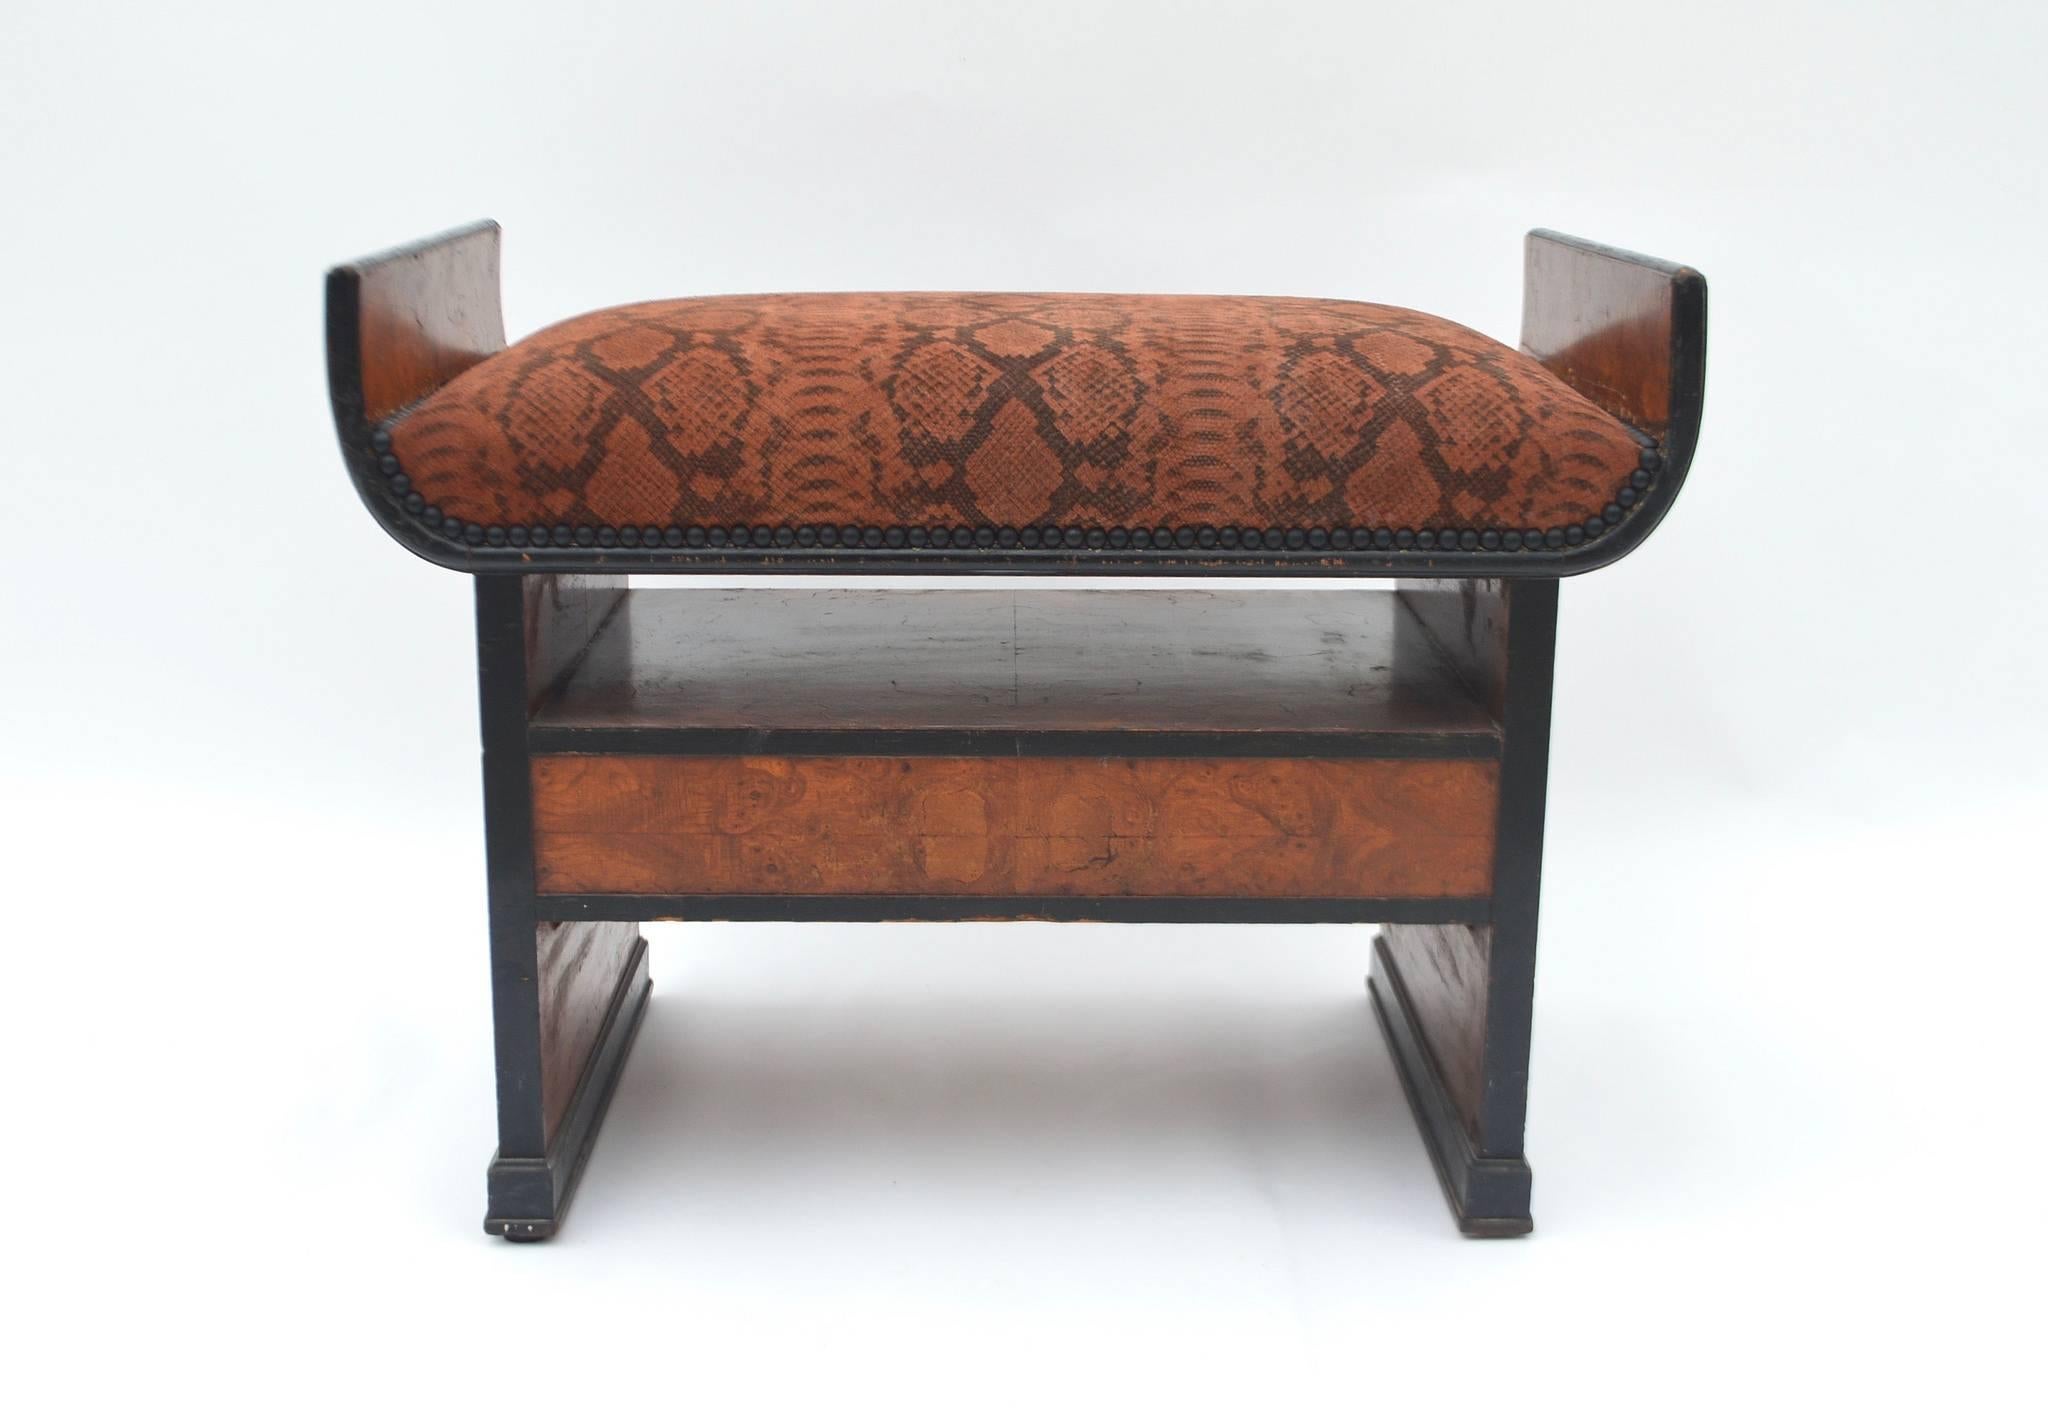 A period Art Deco black patinated and burl wood seat/ottoman with drawer and bronze pull. This handsome seat has been newly upholstered in a snake printed burnt sienna suede pigskin hide.